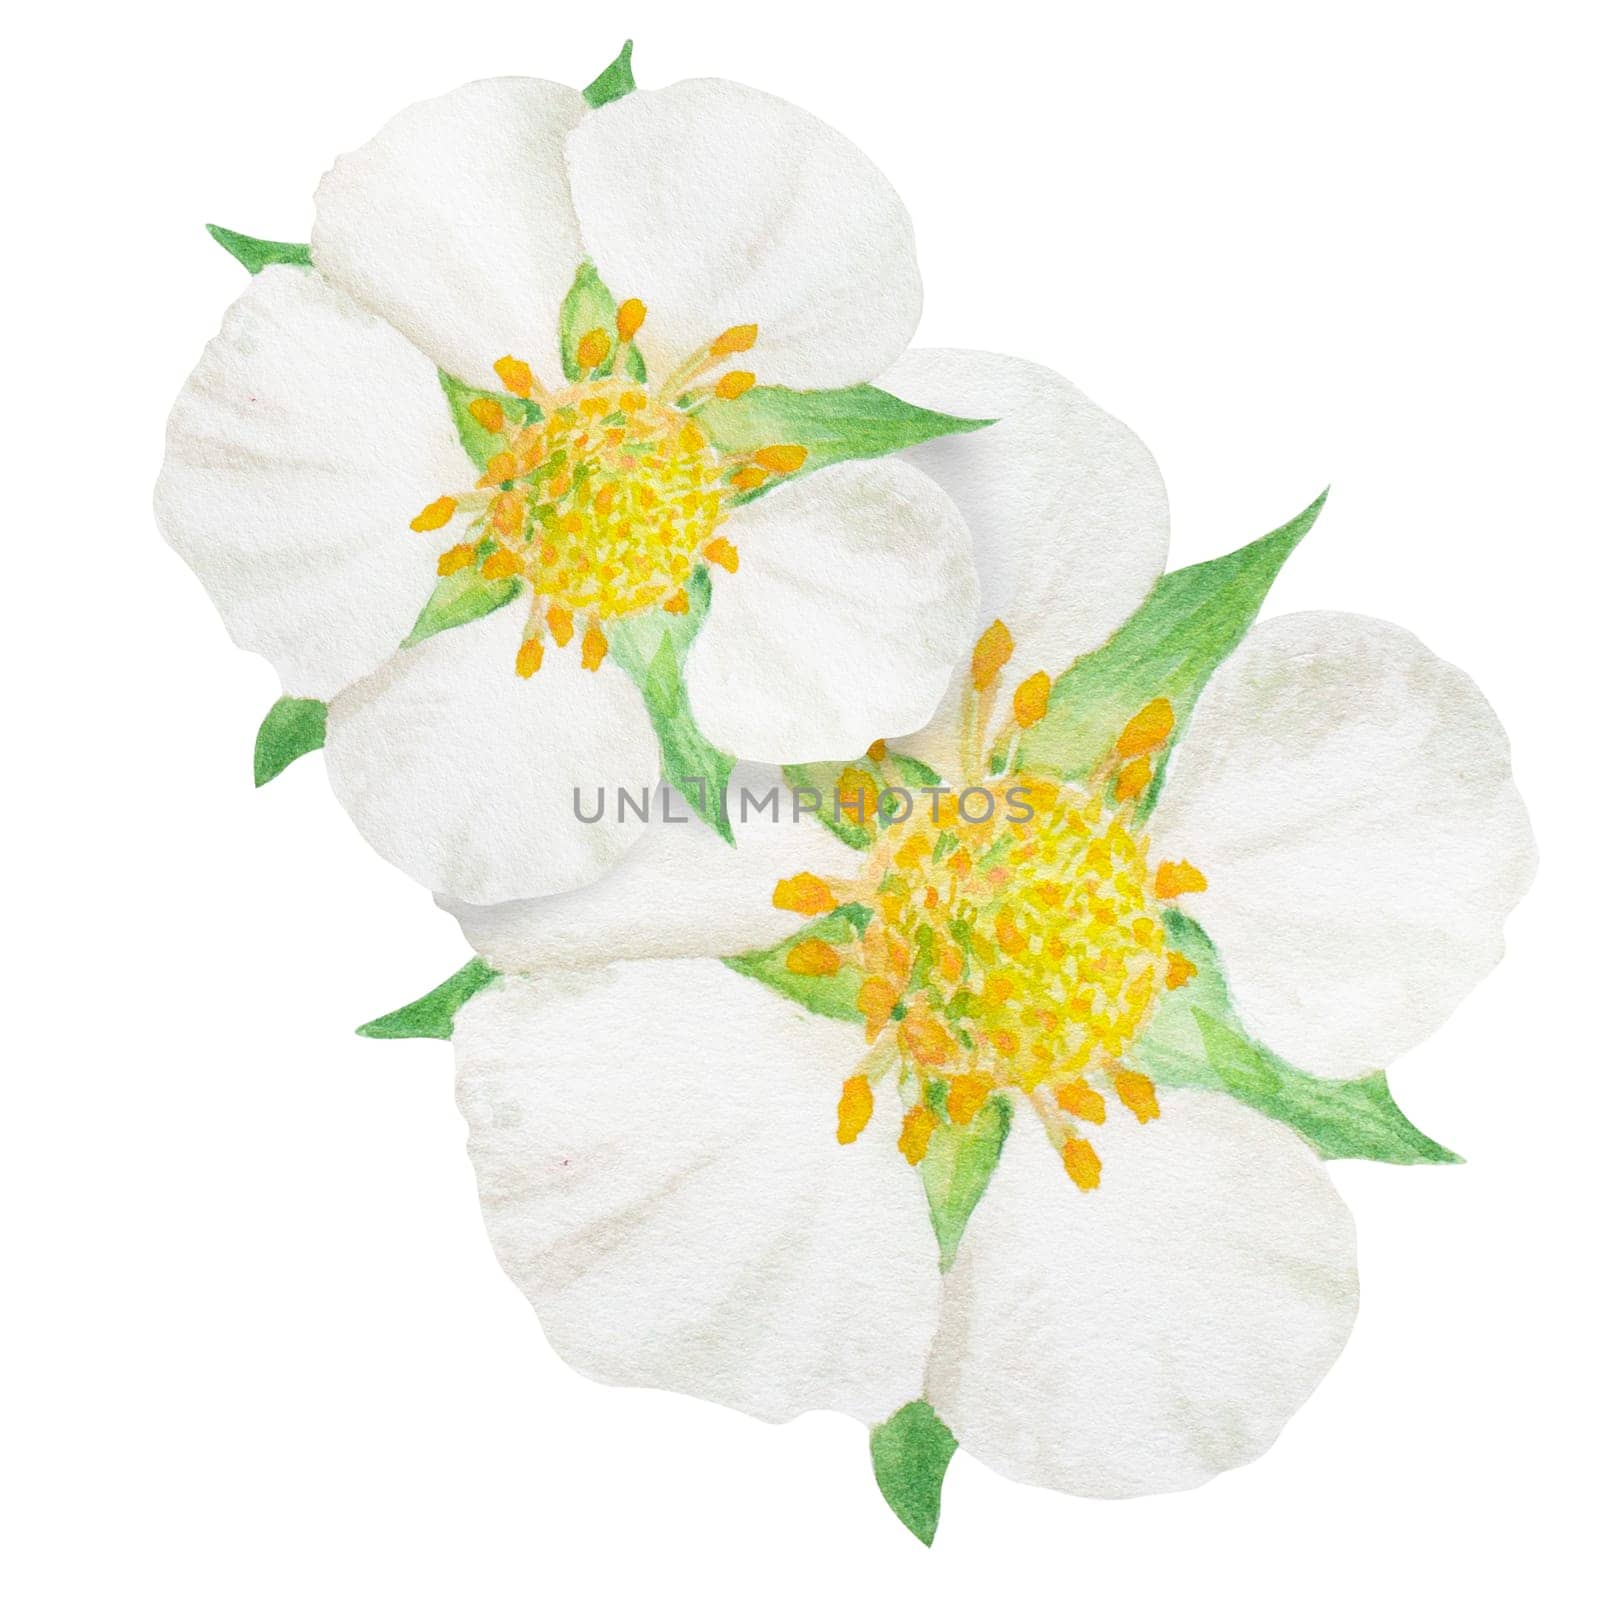 Strawberry flower with white petals hand drawn watercolor illustration. Food art, fresh botanical realistic painting. Summer blossom clipart for restaurant, cafe menu, packaging of farm goods, vegan products, prits, cards